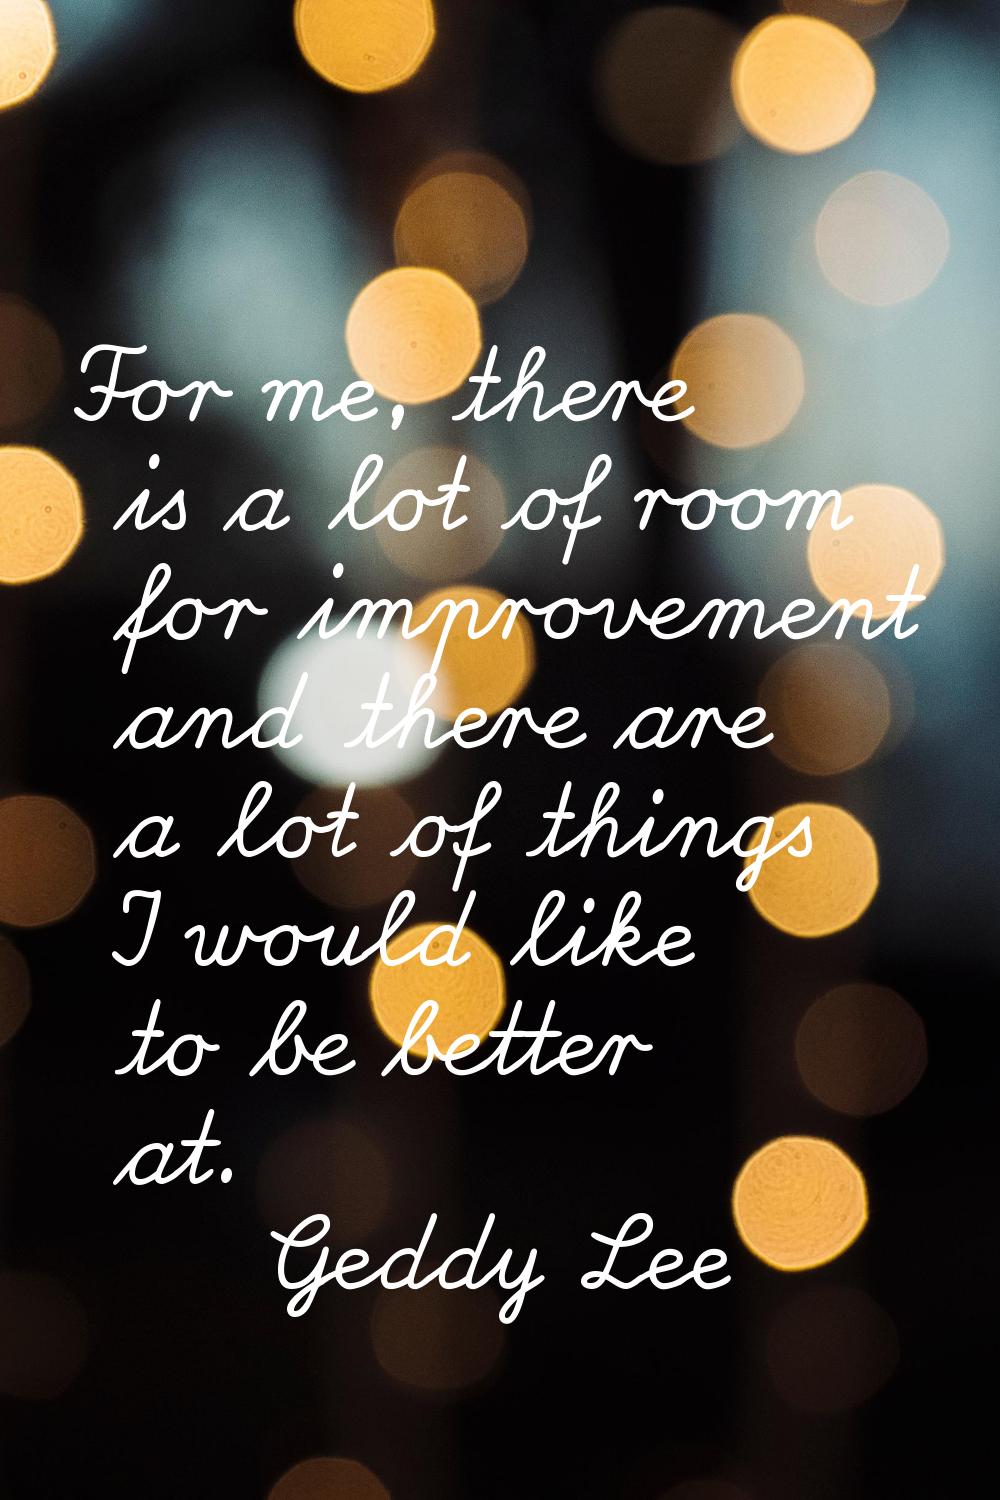 For me, there is a lot of room for improvement and there are a lot of things I would like to be bet